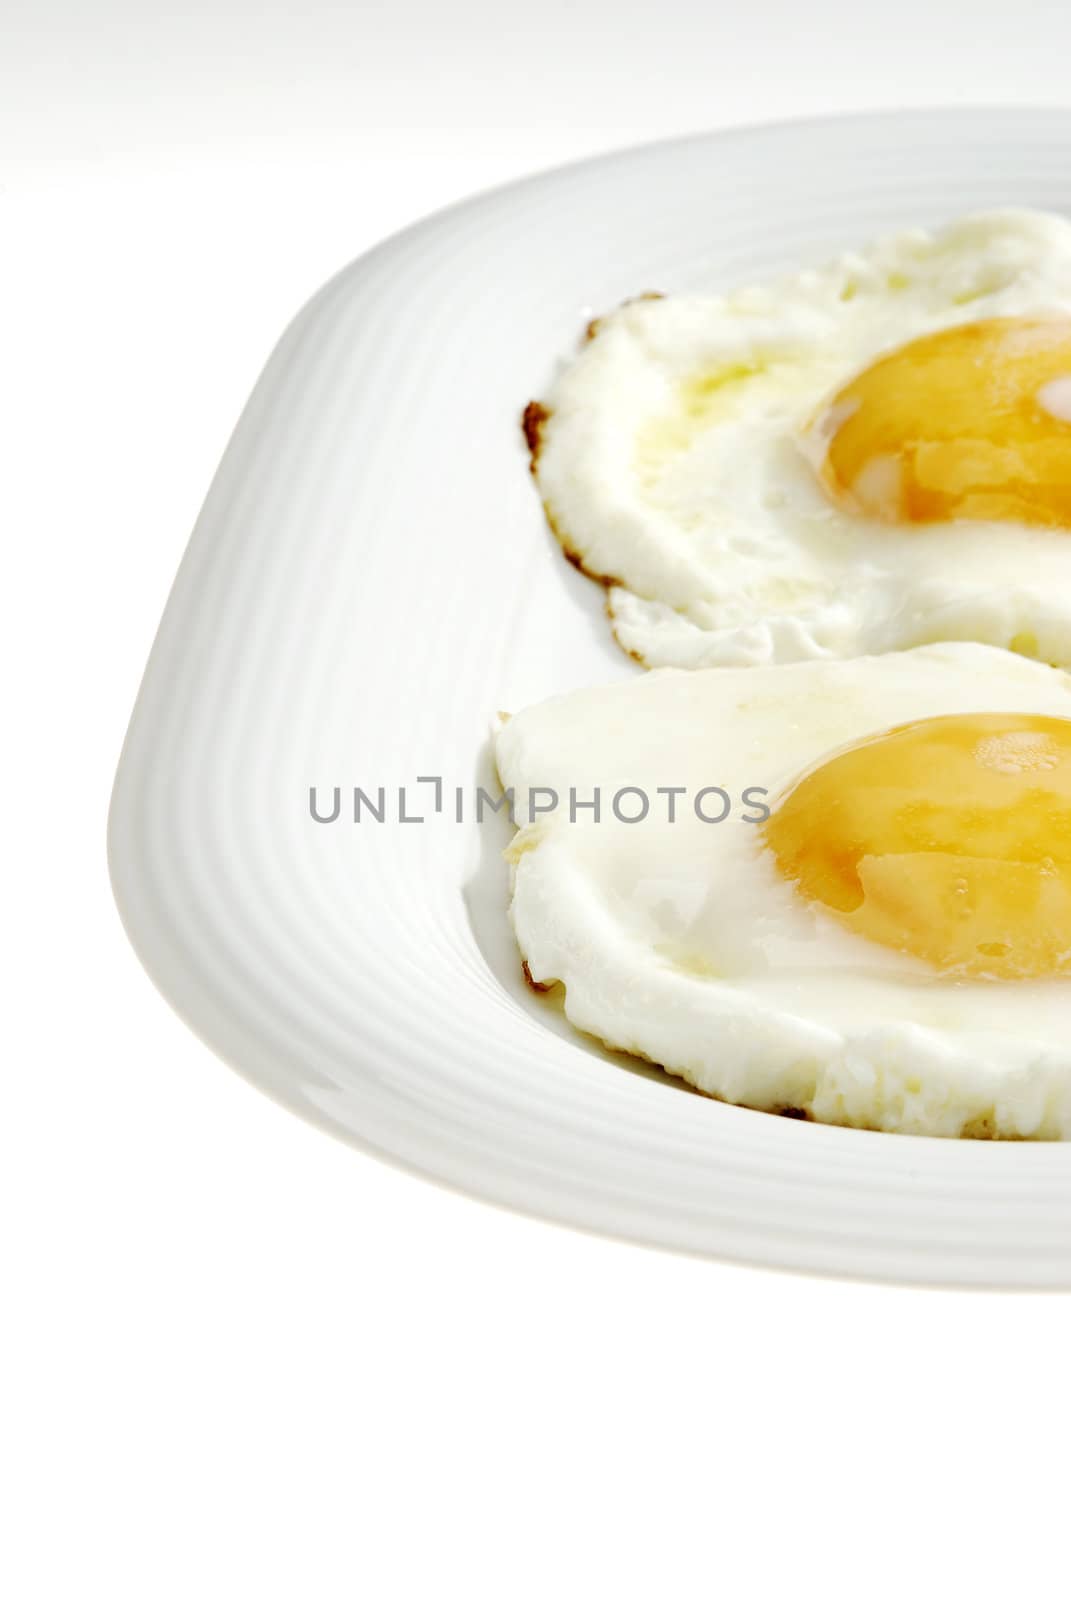 A pair of eggs on the plate